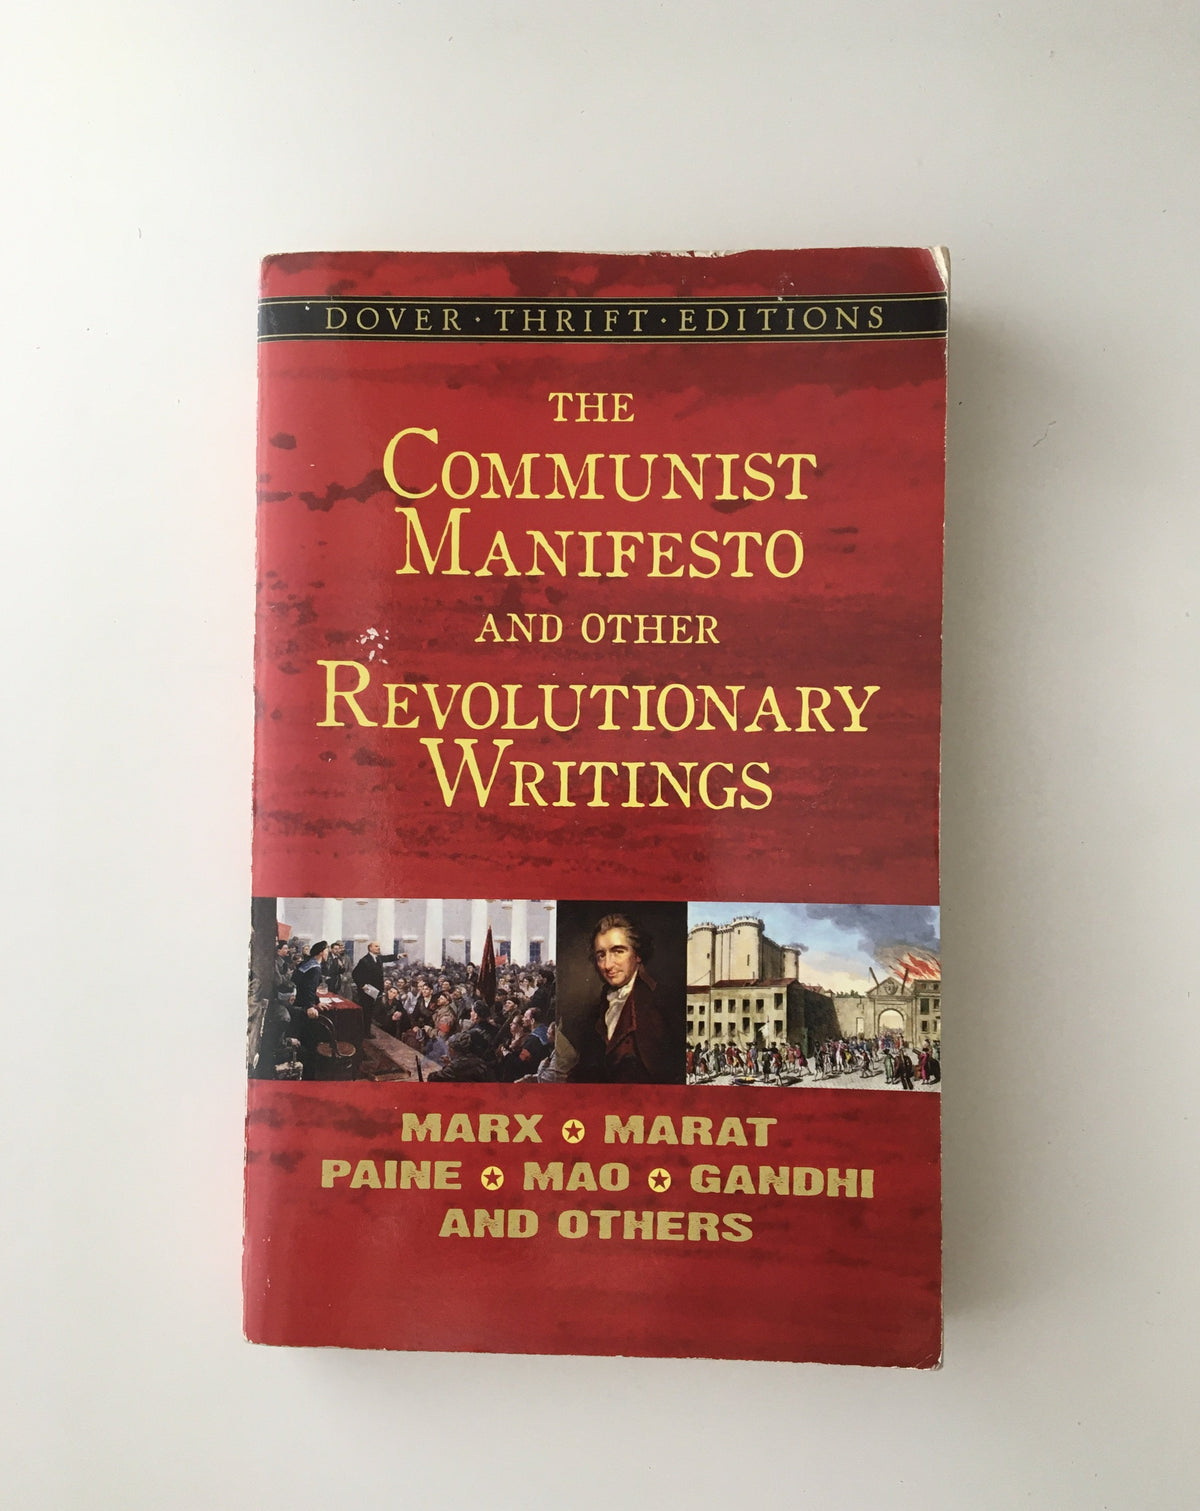 The Communist Manifesto and Other Revolutionary Writings by Karl Marx and others